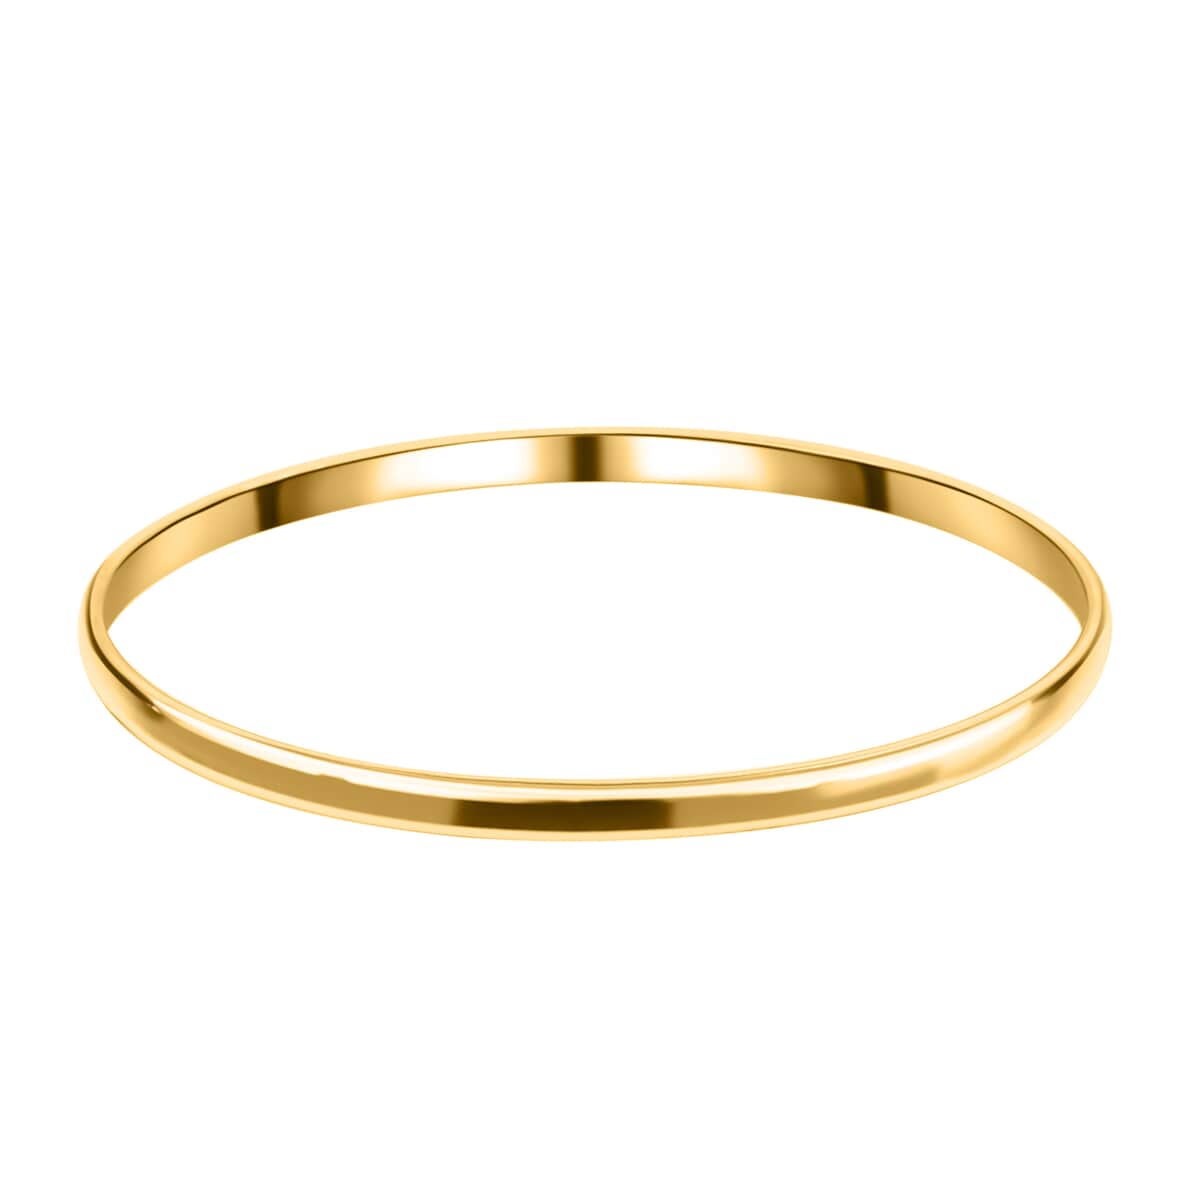 7 Stack Bangle Bracelet in ION Plated Yellow Gold Stainless Steel (8.00 In) 72.80 Grams image number 1